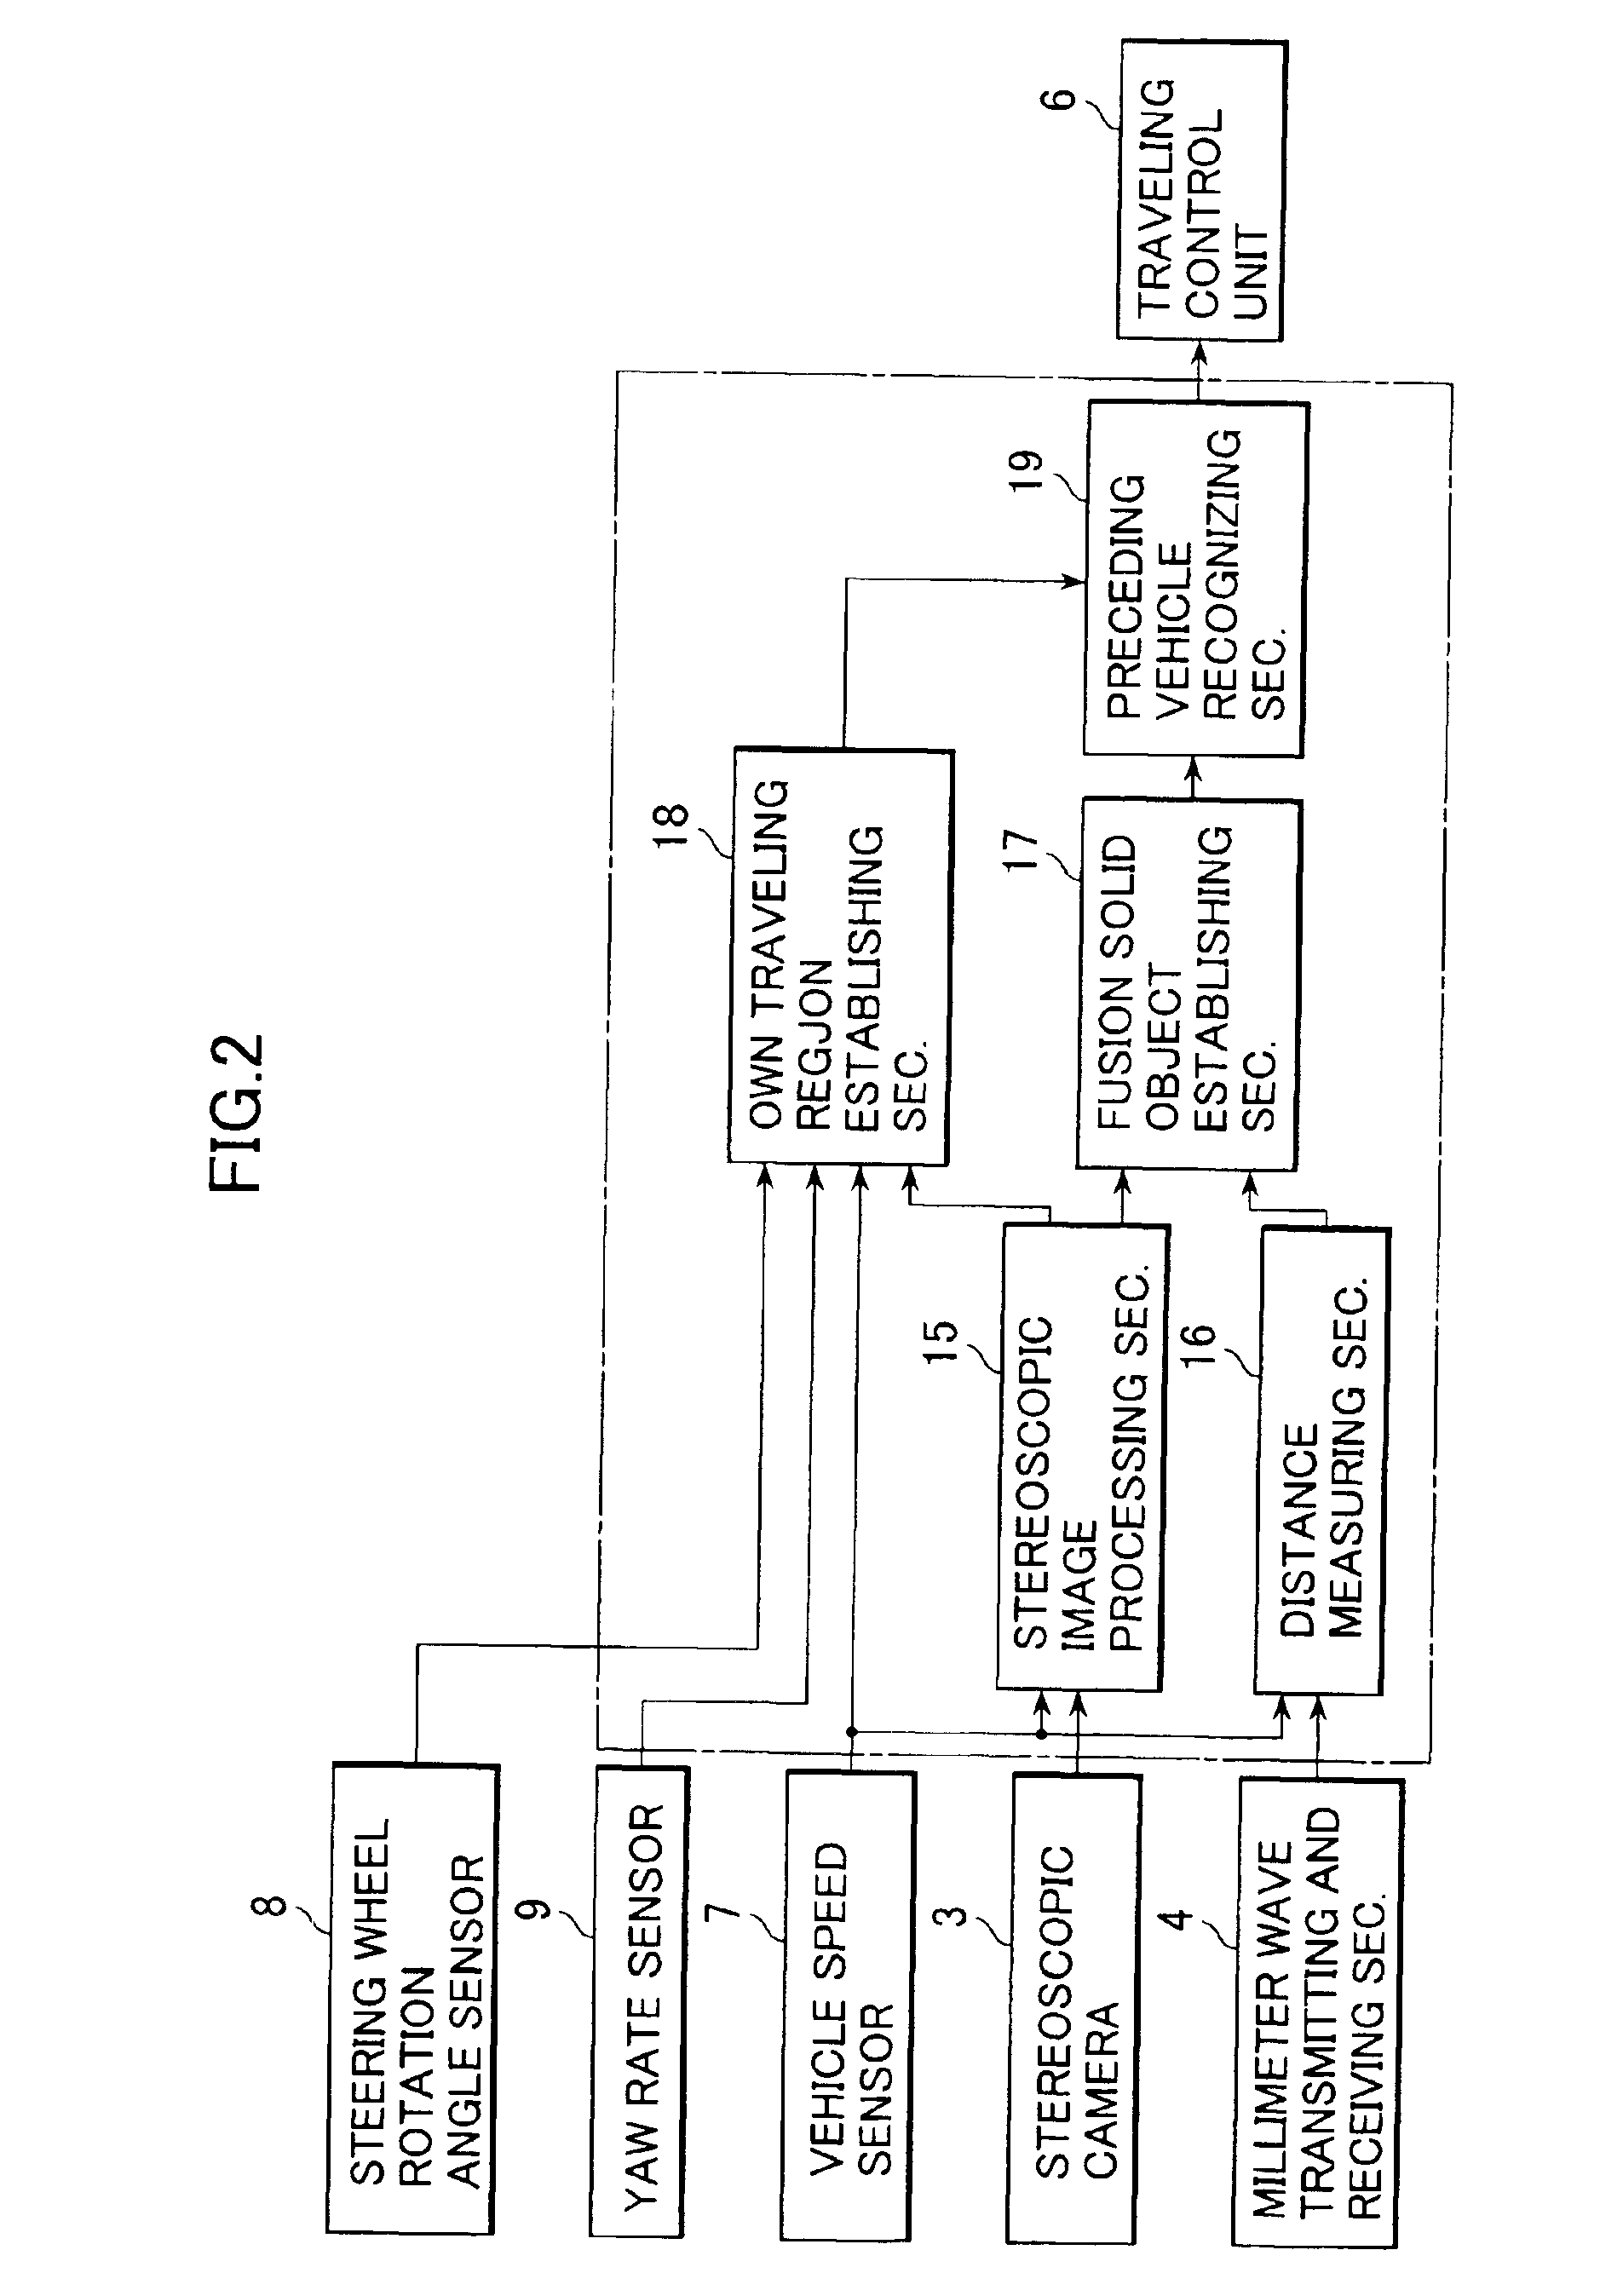 Vehicle surroundings monitoring apparatus and traveling control system incorporating the apparatus